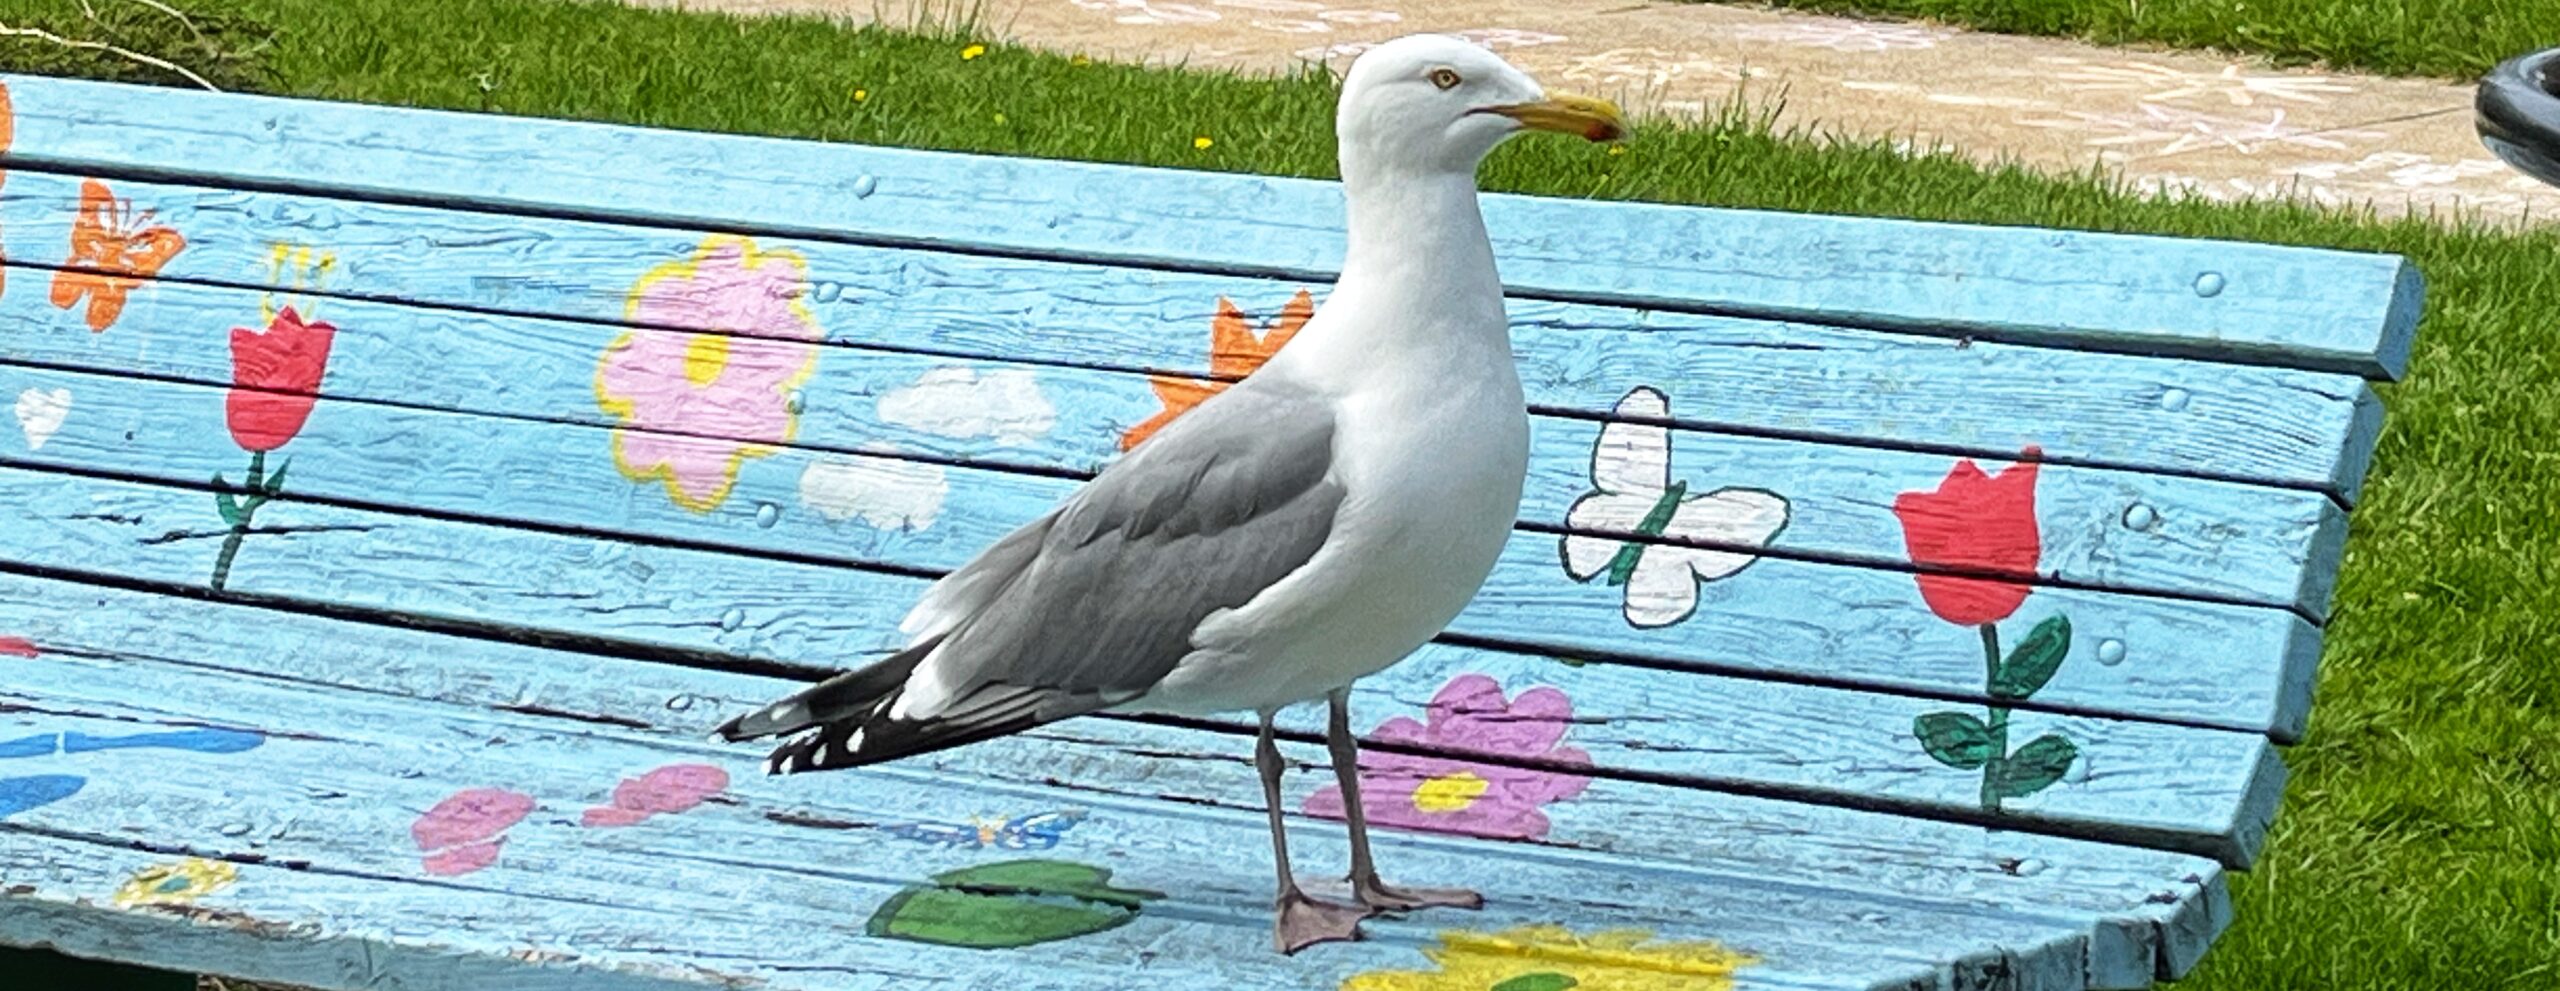 Seagull on a brightly painted park bench